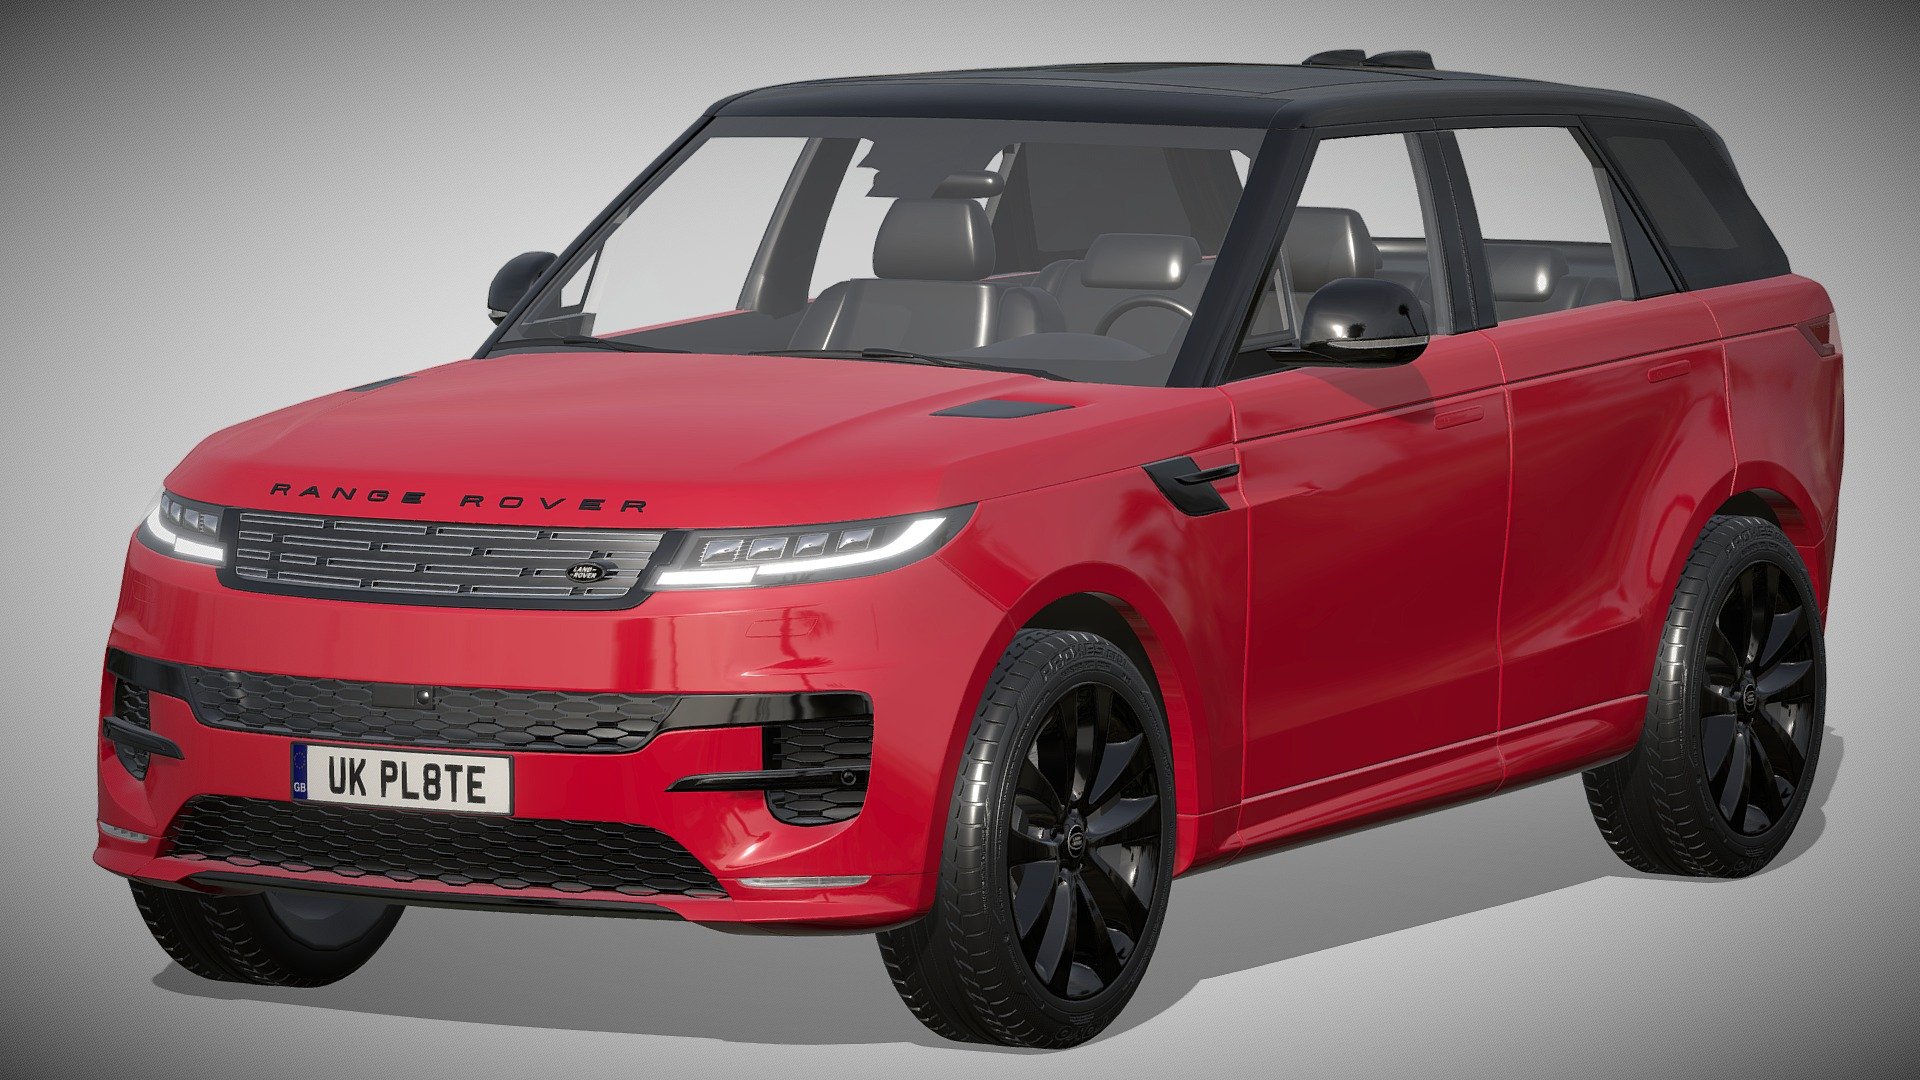 Land Rover Range Rover Sport 2023

https://www.landrover.com/vehicles/new-range-rover-sport/index.html

Clean geometry Light weight model, yet completely detailed for HI-Res renders. Use for movies, Advertisements or games

Corona render and materials

All textures include in *.rar files

Lighting setup is not included in the file! - Land Rover Range Rover Sport 2023 - Buy Royalty Free 3D model by zifir3d 3d model